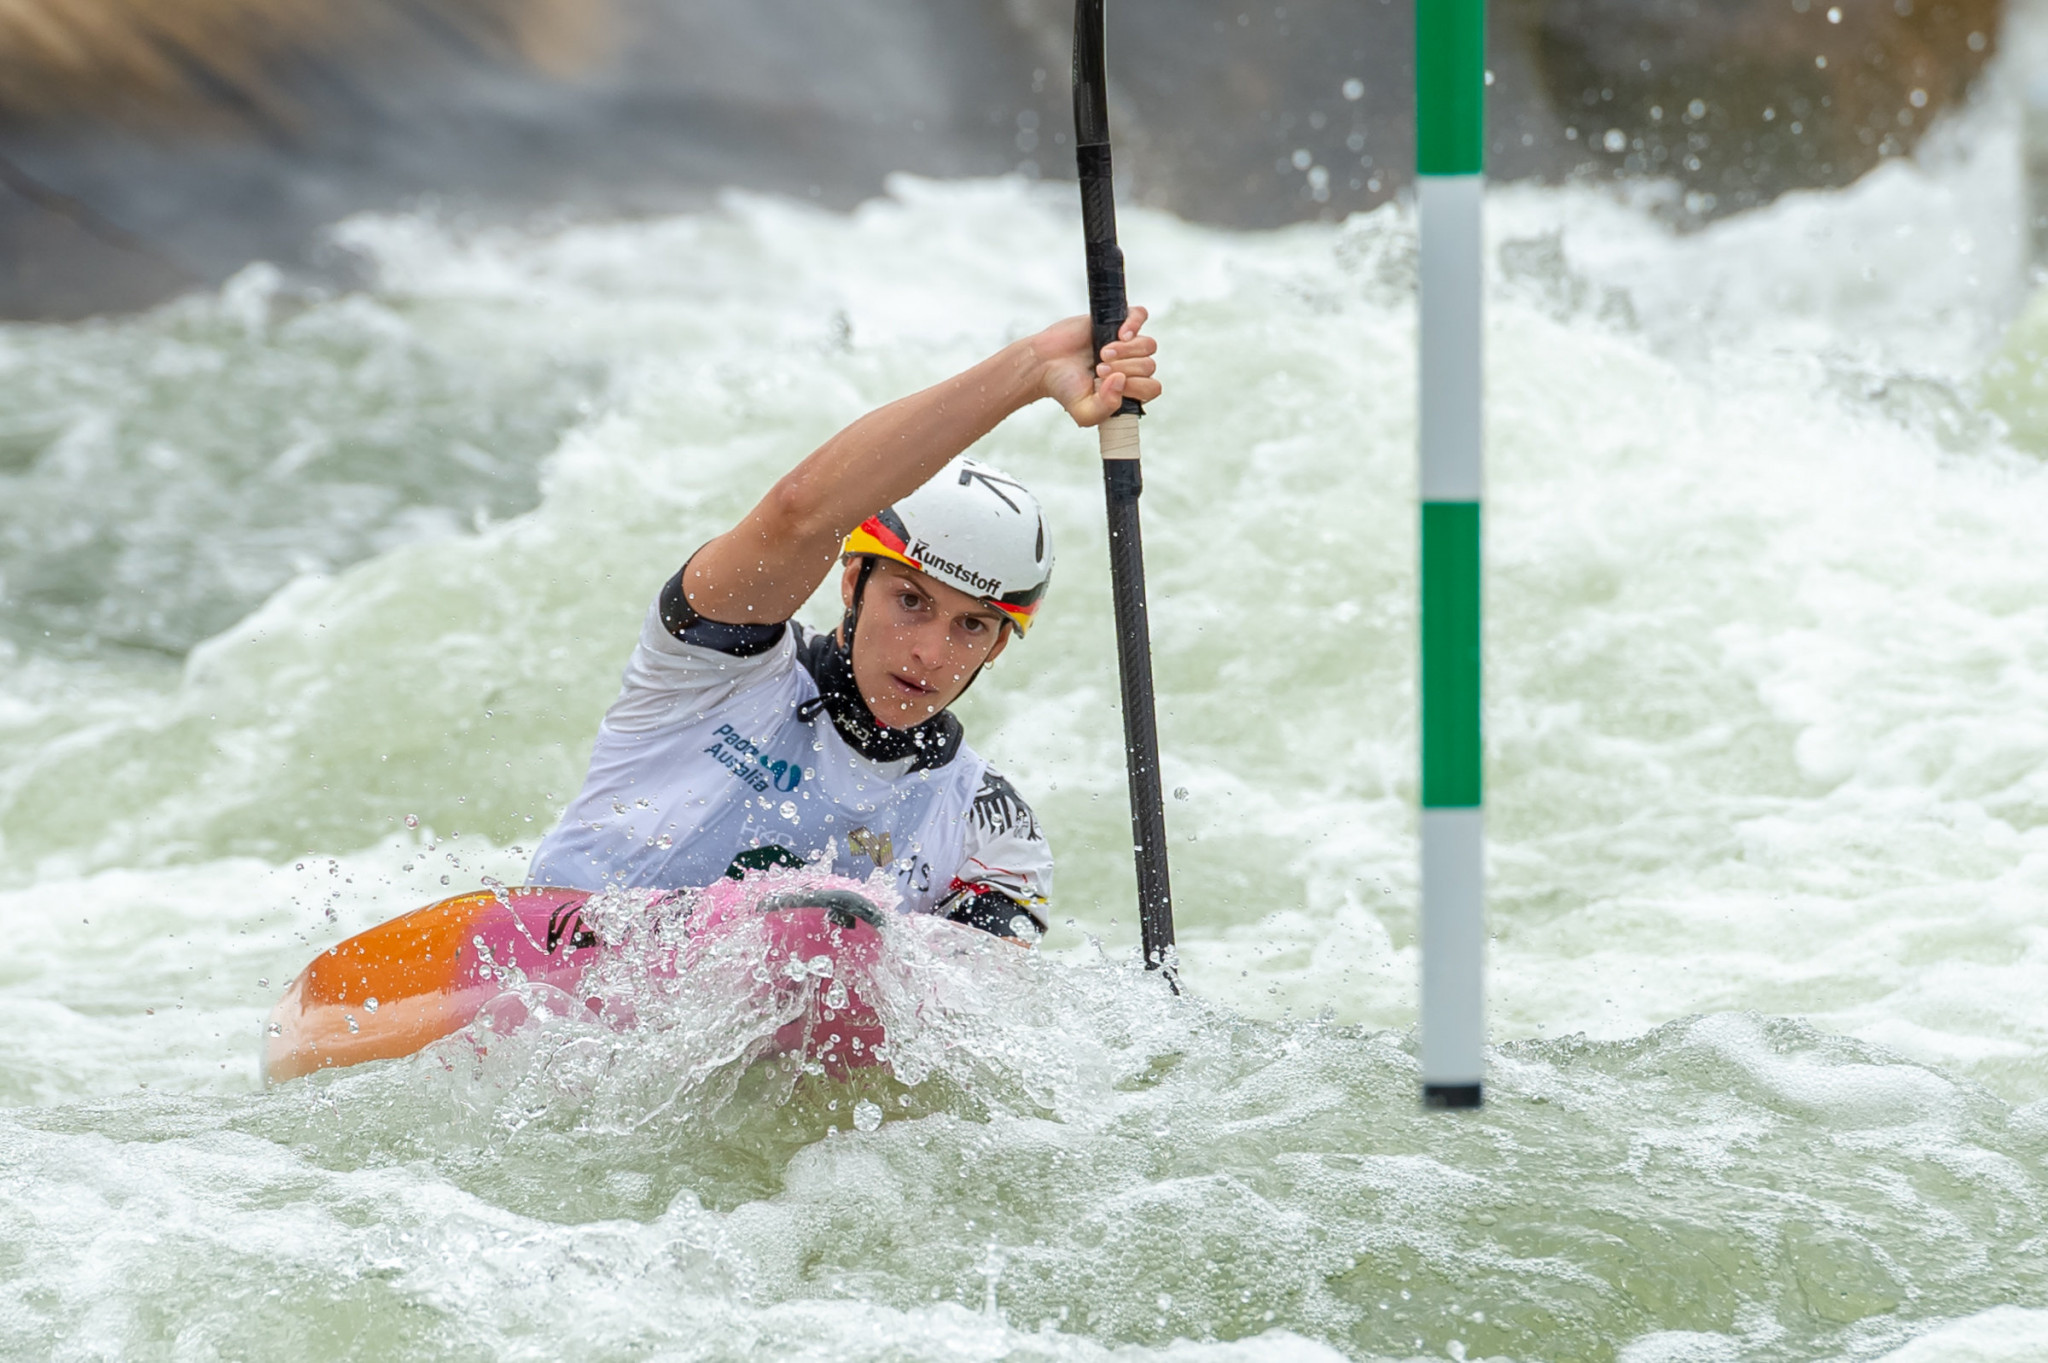 Germany's Ricarda Funk beat crowd favourite Jess Fox to qualify first in the women's K1 qualifying event at the Oceania Canoe Slalom Championships ©Paddle Australia